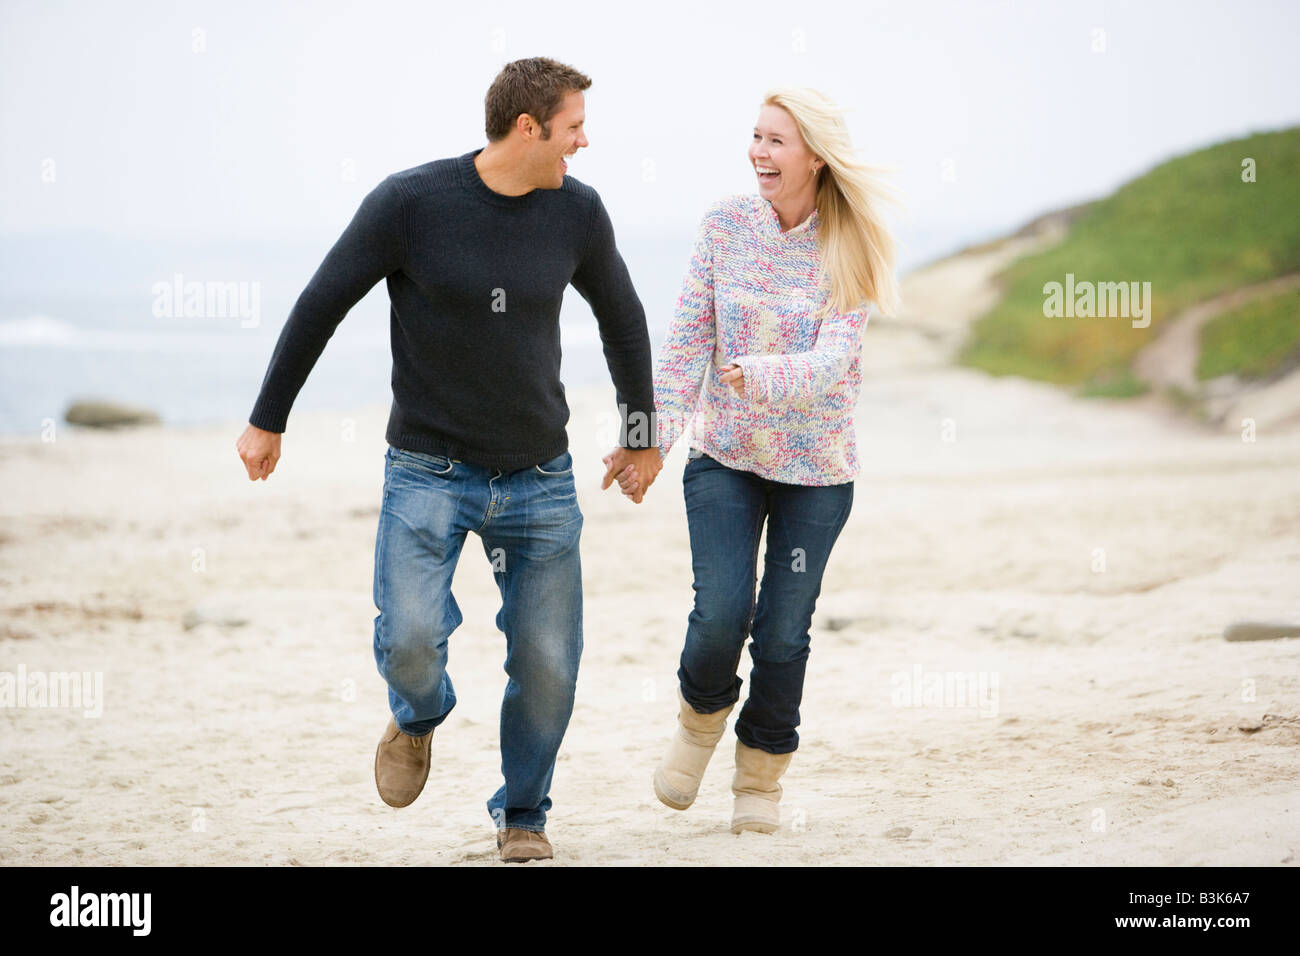 Couple running at beach holding hands smiling Banque D'Images